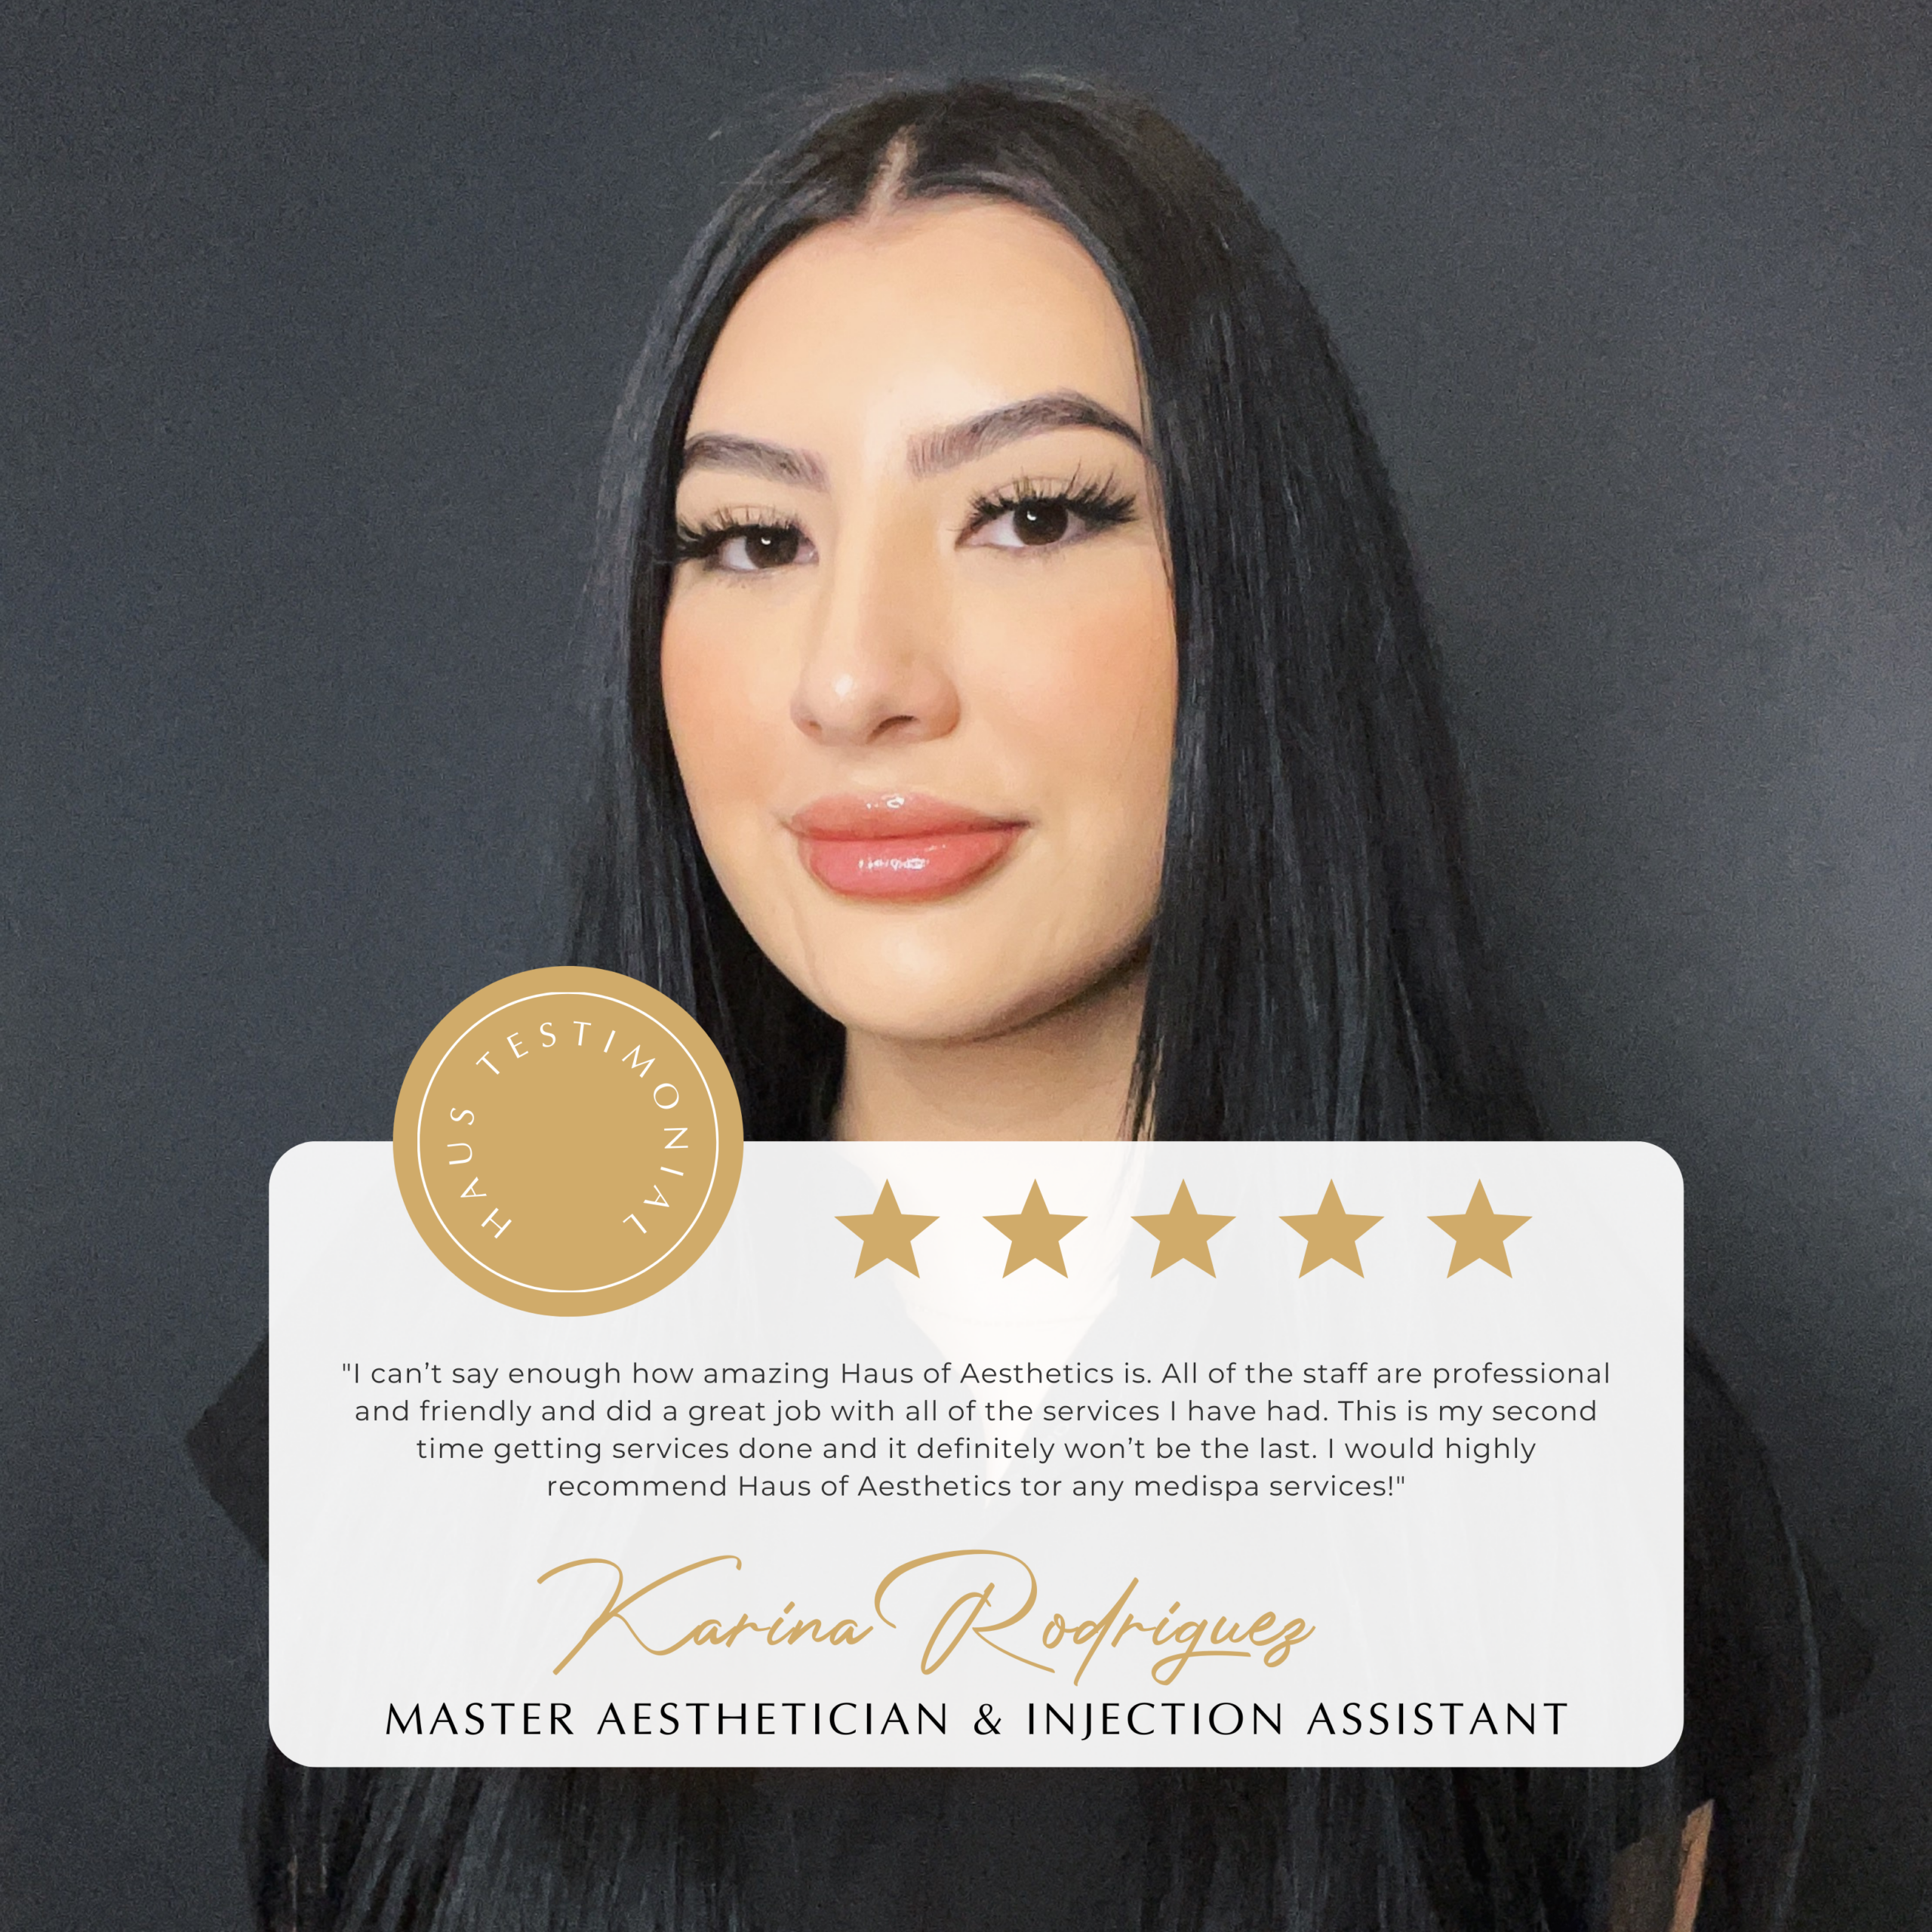 Master aesthetician and injection assistant at Haus of Aesthetics SLC, Karina Rodriguez.